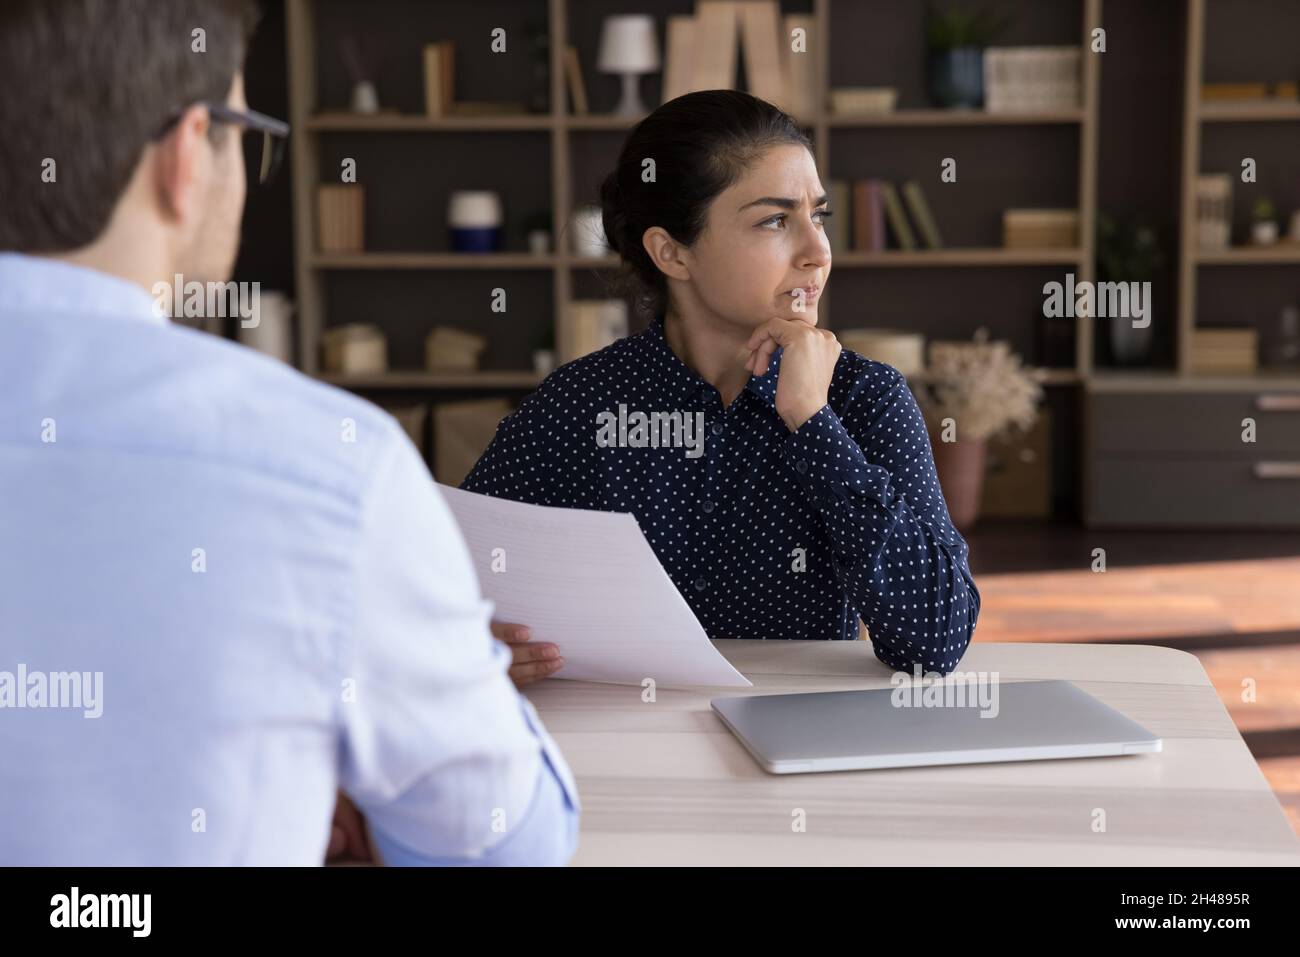 Unhappy young Indian candidate dissatisfied with job offer. Stock Photo